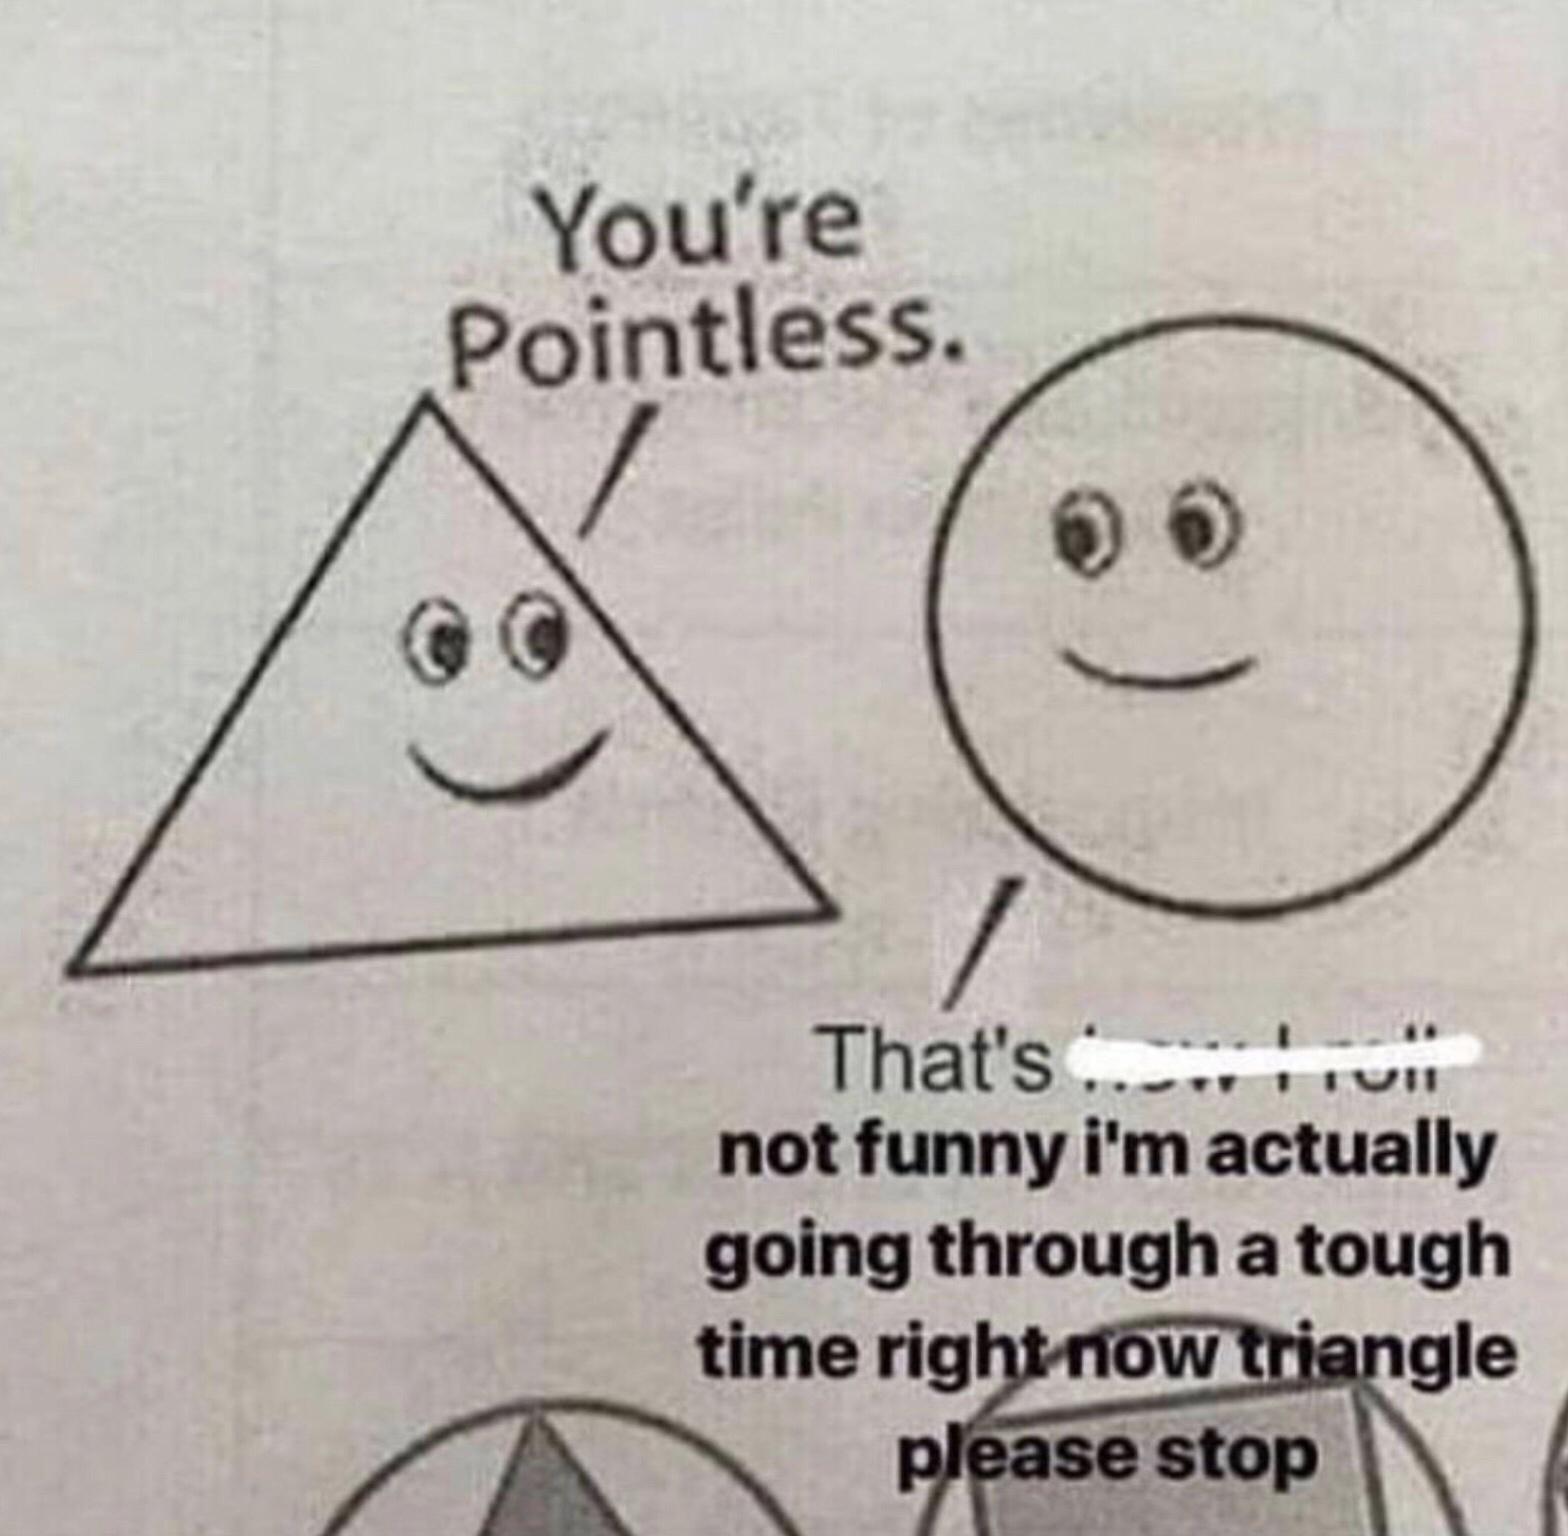 funny memes - dank memes macnaught - You're Pointless. That's .... Tiu not funny i'm actually going through a tough time right now triangle please stop